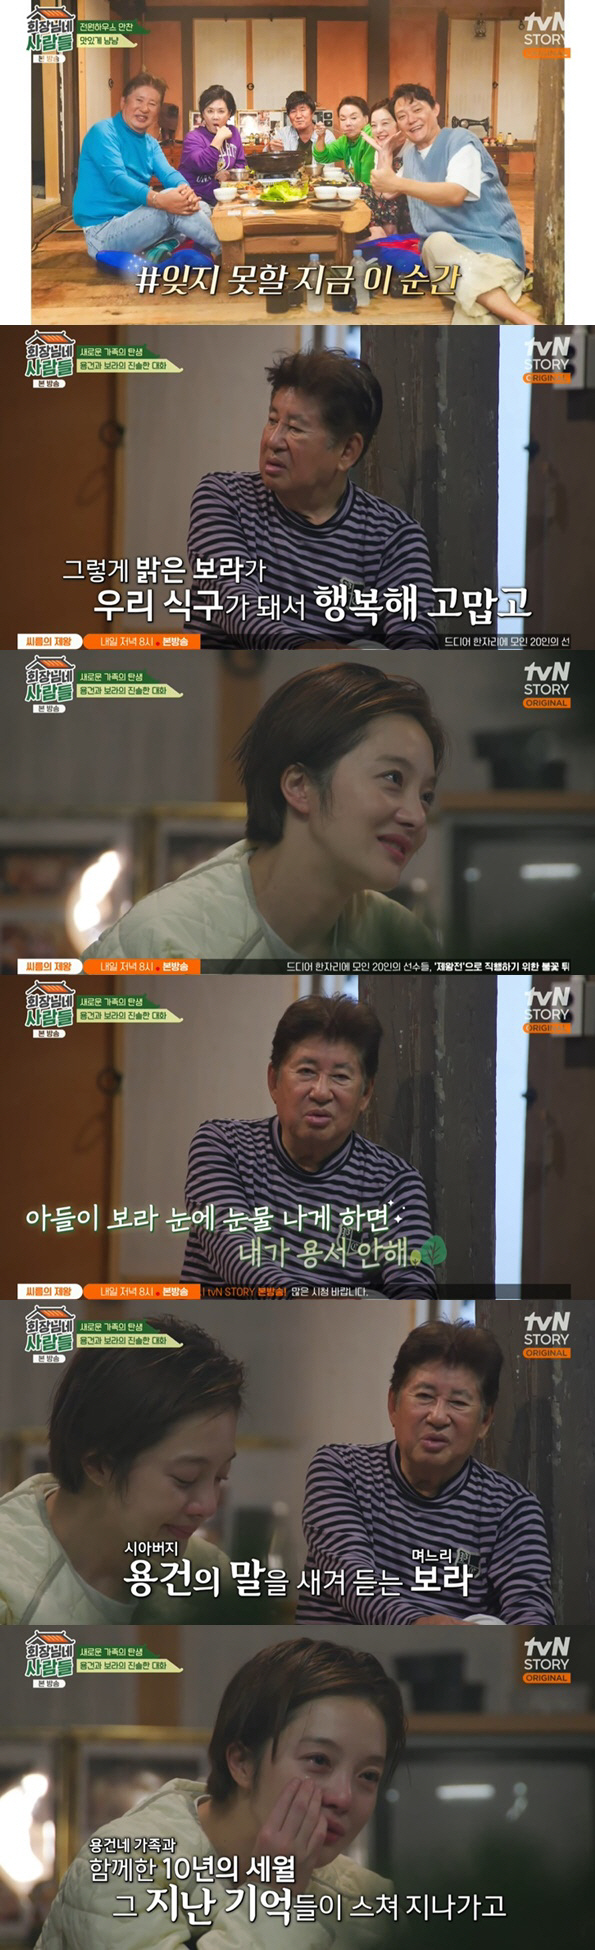 Chairmans people Hwang Bo Ra said he is trying to have a second-generation in vitro procedure.In the TVN STORY Chairmans People broadcast on the 14th, the story of the power experience of Actor Kim Yong-gun, Kim Soo-mi, Lee Gye-in, Hwang Bo Ra and Park Jung-soo was revealed.On this day, a new guest, Power Diary, attracted the attention of actors from Yeongnam Station.Hwang Bo Ra also excelled and greeted me, and the men greeted me with a welcome saying, It is Bora and the school.When asked about his wife, Actor Kim Ji Young, he said, Its been a month since I left home. I went to Jeju Island for a movie and I have not been there for over a month.I am staying at Jeju Island, not going back and forth. Kim Yong-gun missed Kim Ji Young, saying, I want to see a good length. Kim Yong-gun While the male members went to see the dinner preparations, Kim Soo-mi and Park Jung-soo took a look at Hwang Bo Ra and conducted a daughter-in-law test to give tension and laughter.First tested fruit-cutting, and Hwang Bo Ra was storm-pointed to Kim Soo-mi and Park Jung-soo for thickening the rind, Kim Soo-mi said, If youre like your old mother-in-law, youre getting married.What if you cut the inside of the fruit like this? Cut the skin thinly, he advised.Park Jung-soo told Hwang Bo Ra, If you cut the fruit beautifully, you will have a pretty daughter. Hwang Bo Ra said, I want to have that daughter.Kim Yong-gun and Park Jung-soo asked Hwang Bo Ra about the second generation plan, and Hwang Bo Ra said, I am preparing a test tube to give birth to a second generation.Ive been doing it for three months, but now Im resting. I failed once. Usually, dozens of eggs are produced, but I can not produce much. I ovulated and failed because I could not get an embryo.Park Jung-soo responded, Its not easy, and Kim Soo-mi said, Its so difficult.Then he said that he would become a twin, he cheered Hwang Bo Ra.Hwang Bo Ra said, Do you have any know-how to have a baby? Kim Soo-mi said, We did not know because we had a baby in our time. Park Jung-soo also said, We were married in our twenties.Once upon a time, when I was over 30 years old, I was an old woman. He then proceeded to play a Daughter-in-Law balance game on the spot.Hwang Bo Ra chose the former, saying that it would be better to call Moy Yat in a short conversation with her mother-in-law, Sometimes I call, but I talk for two to three hours.Kim Soo-mi said that her mother-in-law and Daughter-in-law could not stay like a mother and daughter, and she was surprised to find out that she did not talk or meet after marrying son with Daughter-in-law Seo Hurim.Kim Soo-mi said, I wanted my junior to be Daughter-in-law, but Daughter-in-law is Daughter-in-law.However, Daughter-in-law came and changed clothes.  After Hyorim became Daughter-in-law, they did not meet each other and eat rice. Before marriage, I often met and became friendly, but I became careful because I became a mother-in-law.That evening, Kim Yong-gun touched Daughter-in-law Hwang Bo Ra with warm words.Kim Yong-gun said, How does it feel to come and hang out with the teachers? How precious is the time to spend the day together with my father-in-law in the same pro before marriage. These moments will be memorable forever.Kim Yong-gun said, I am happy and thankful that Bright Bora is our family. It is a lovely daughter-in-law. I will do better and save you.Congratulations on your marriage, he said heartily to Hwang Bo Ra.In his father-in-laws Confessions, Hwang Bo Ra cried, Ill do really well.Hwang Bo Ra poured tears as if he had been with the Kim Yong-gun family for 10 years and said, I really think I should do well with my heart.